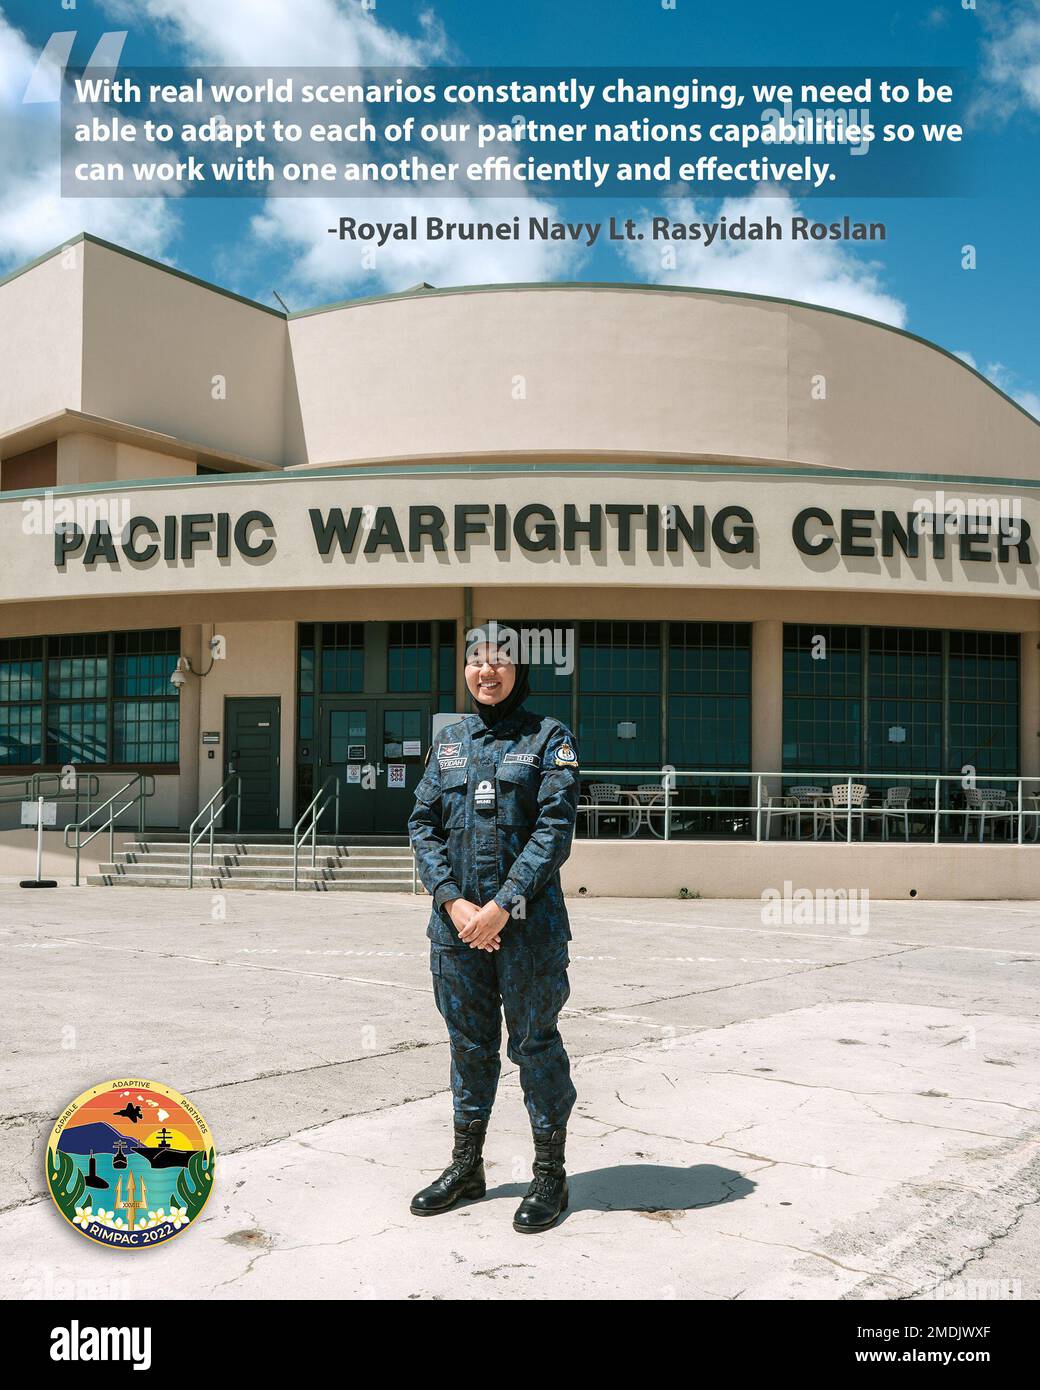 220725-N-N0842-1002 PEARL HARBOR (July 25, 2022) - Royal Brunei Navy Lt. Rasyidah Roslan, Combined-Force Maritime Component Commander Assistant Battle Watch Captain, poses for a photograph at the K. Mark Take Pacific Warfighting Center during Rim of the Pacific (RIMPAC) 2022. Twenty-six nations, 38 ships, three submarines, more than 170 aircraft and 25,000 personnel are participating in RIMPAC from June 29 to Aug. 4 in and around the Hawaiian Islands and Southern California. The world’s largest international maritime exercise, RIMPAC provides a unique training opportunity while fostering and s Stock Photo